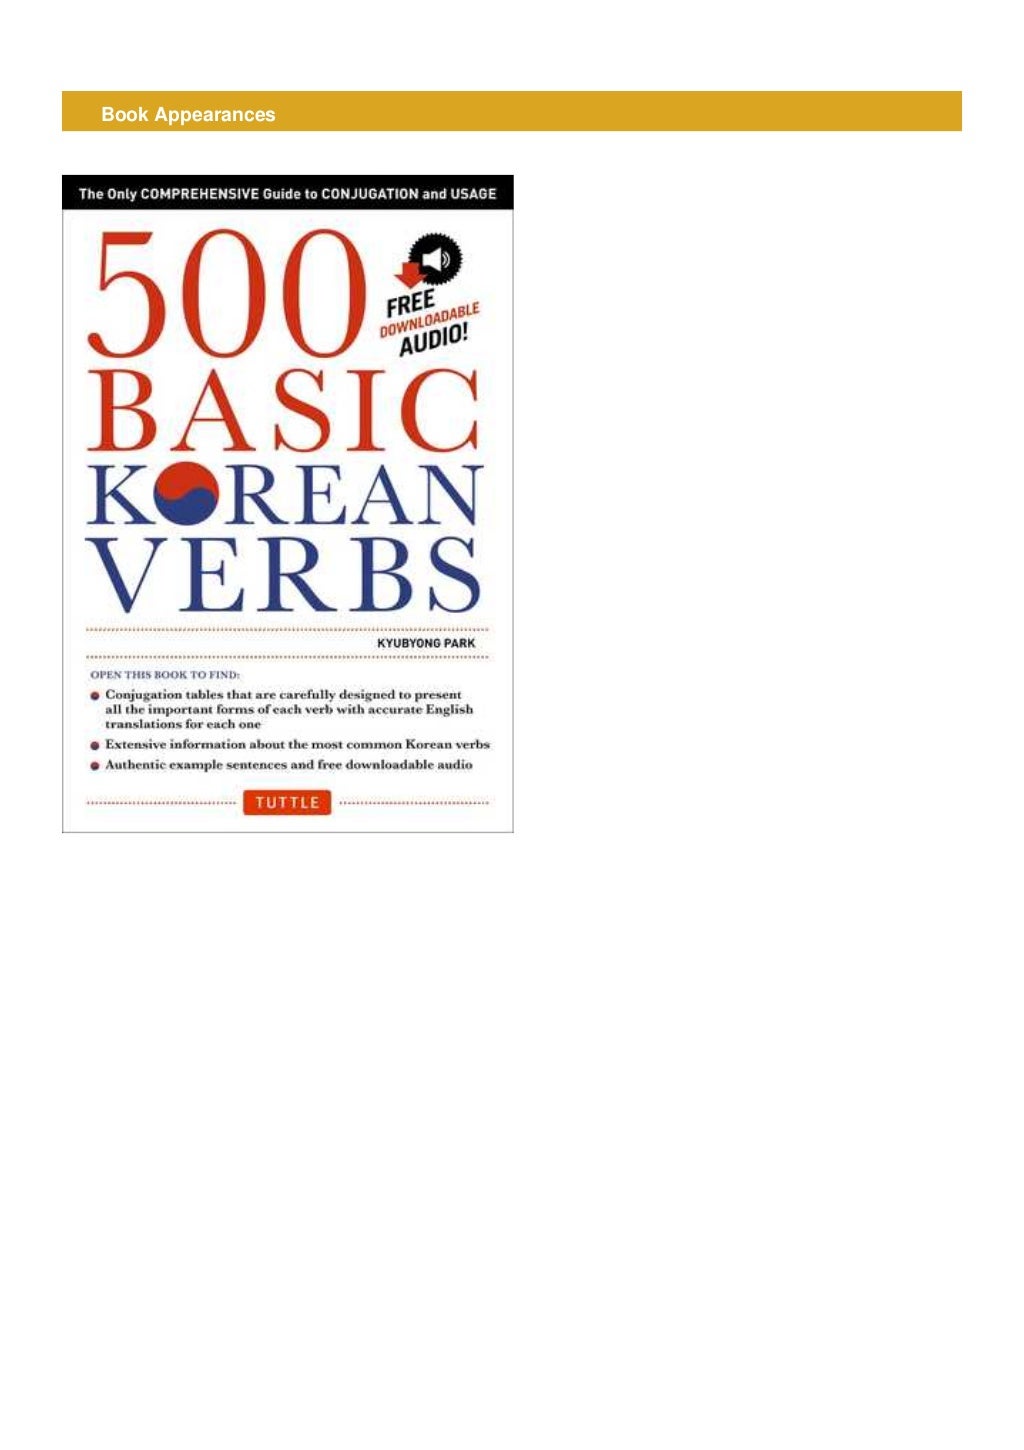 pdf-free500-basic-korean-verbs-the-only-comprehensive-guide-to-conjugation-and-usage